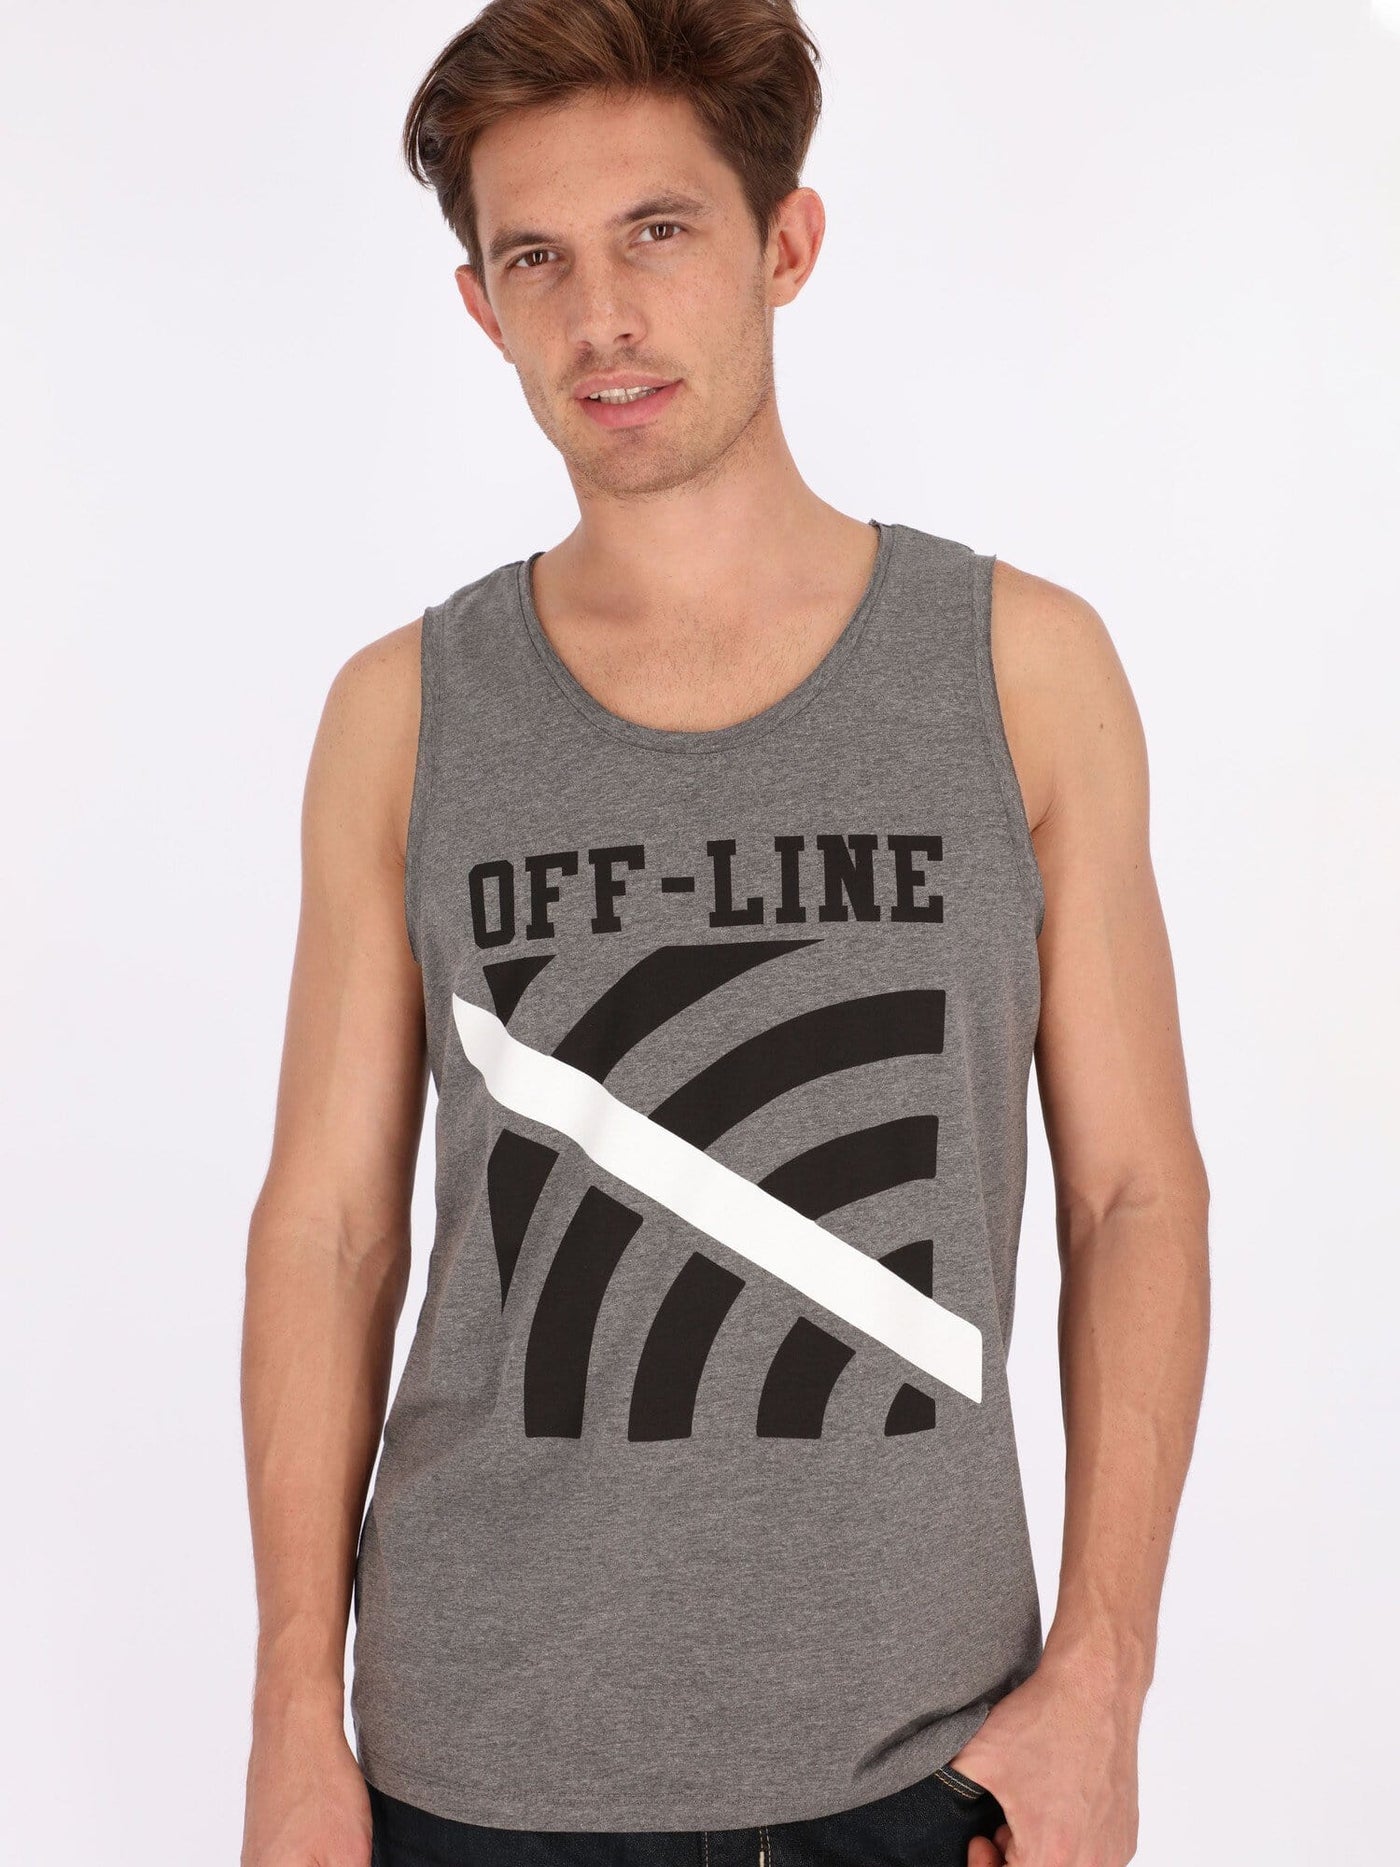 OR T-Shirts Heather Grey / S Front Print Sleeveless T-Shirt